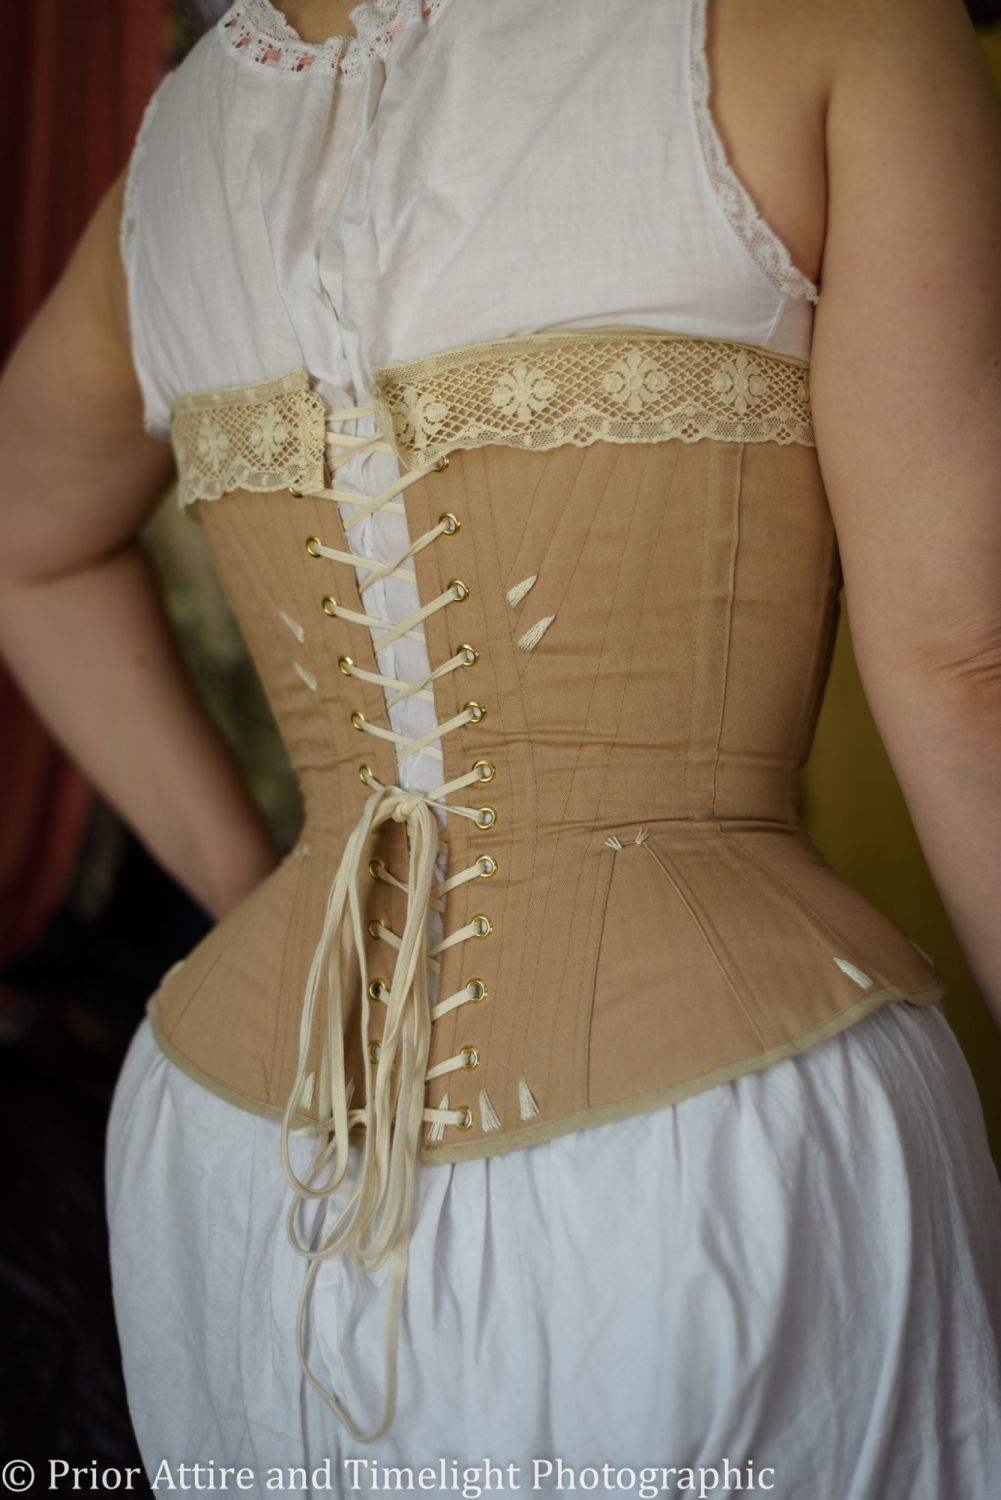 Performance Corsets: What's the Best Option